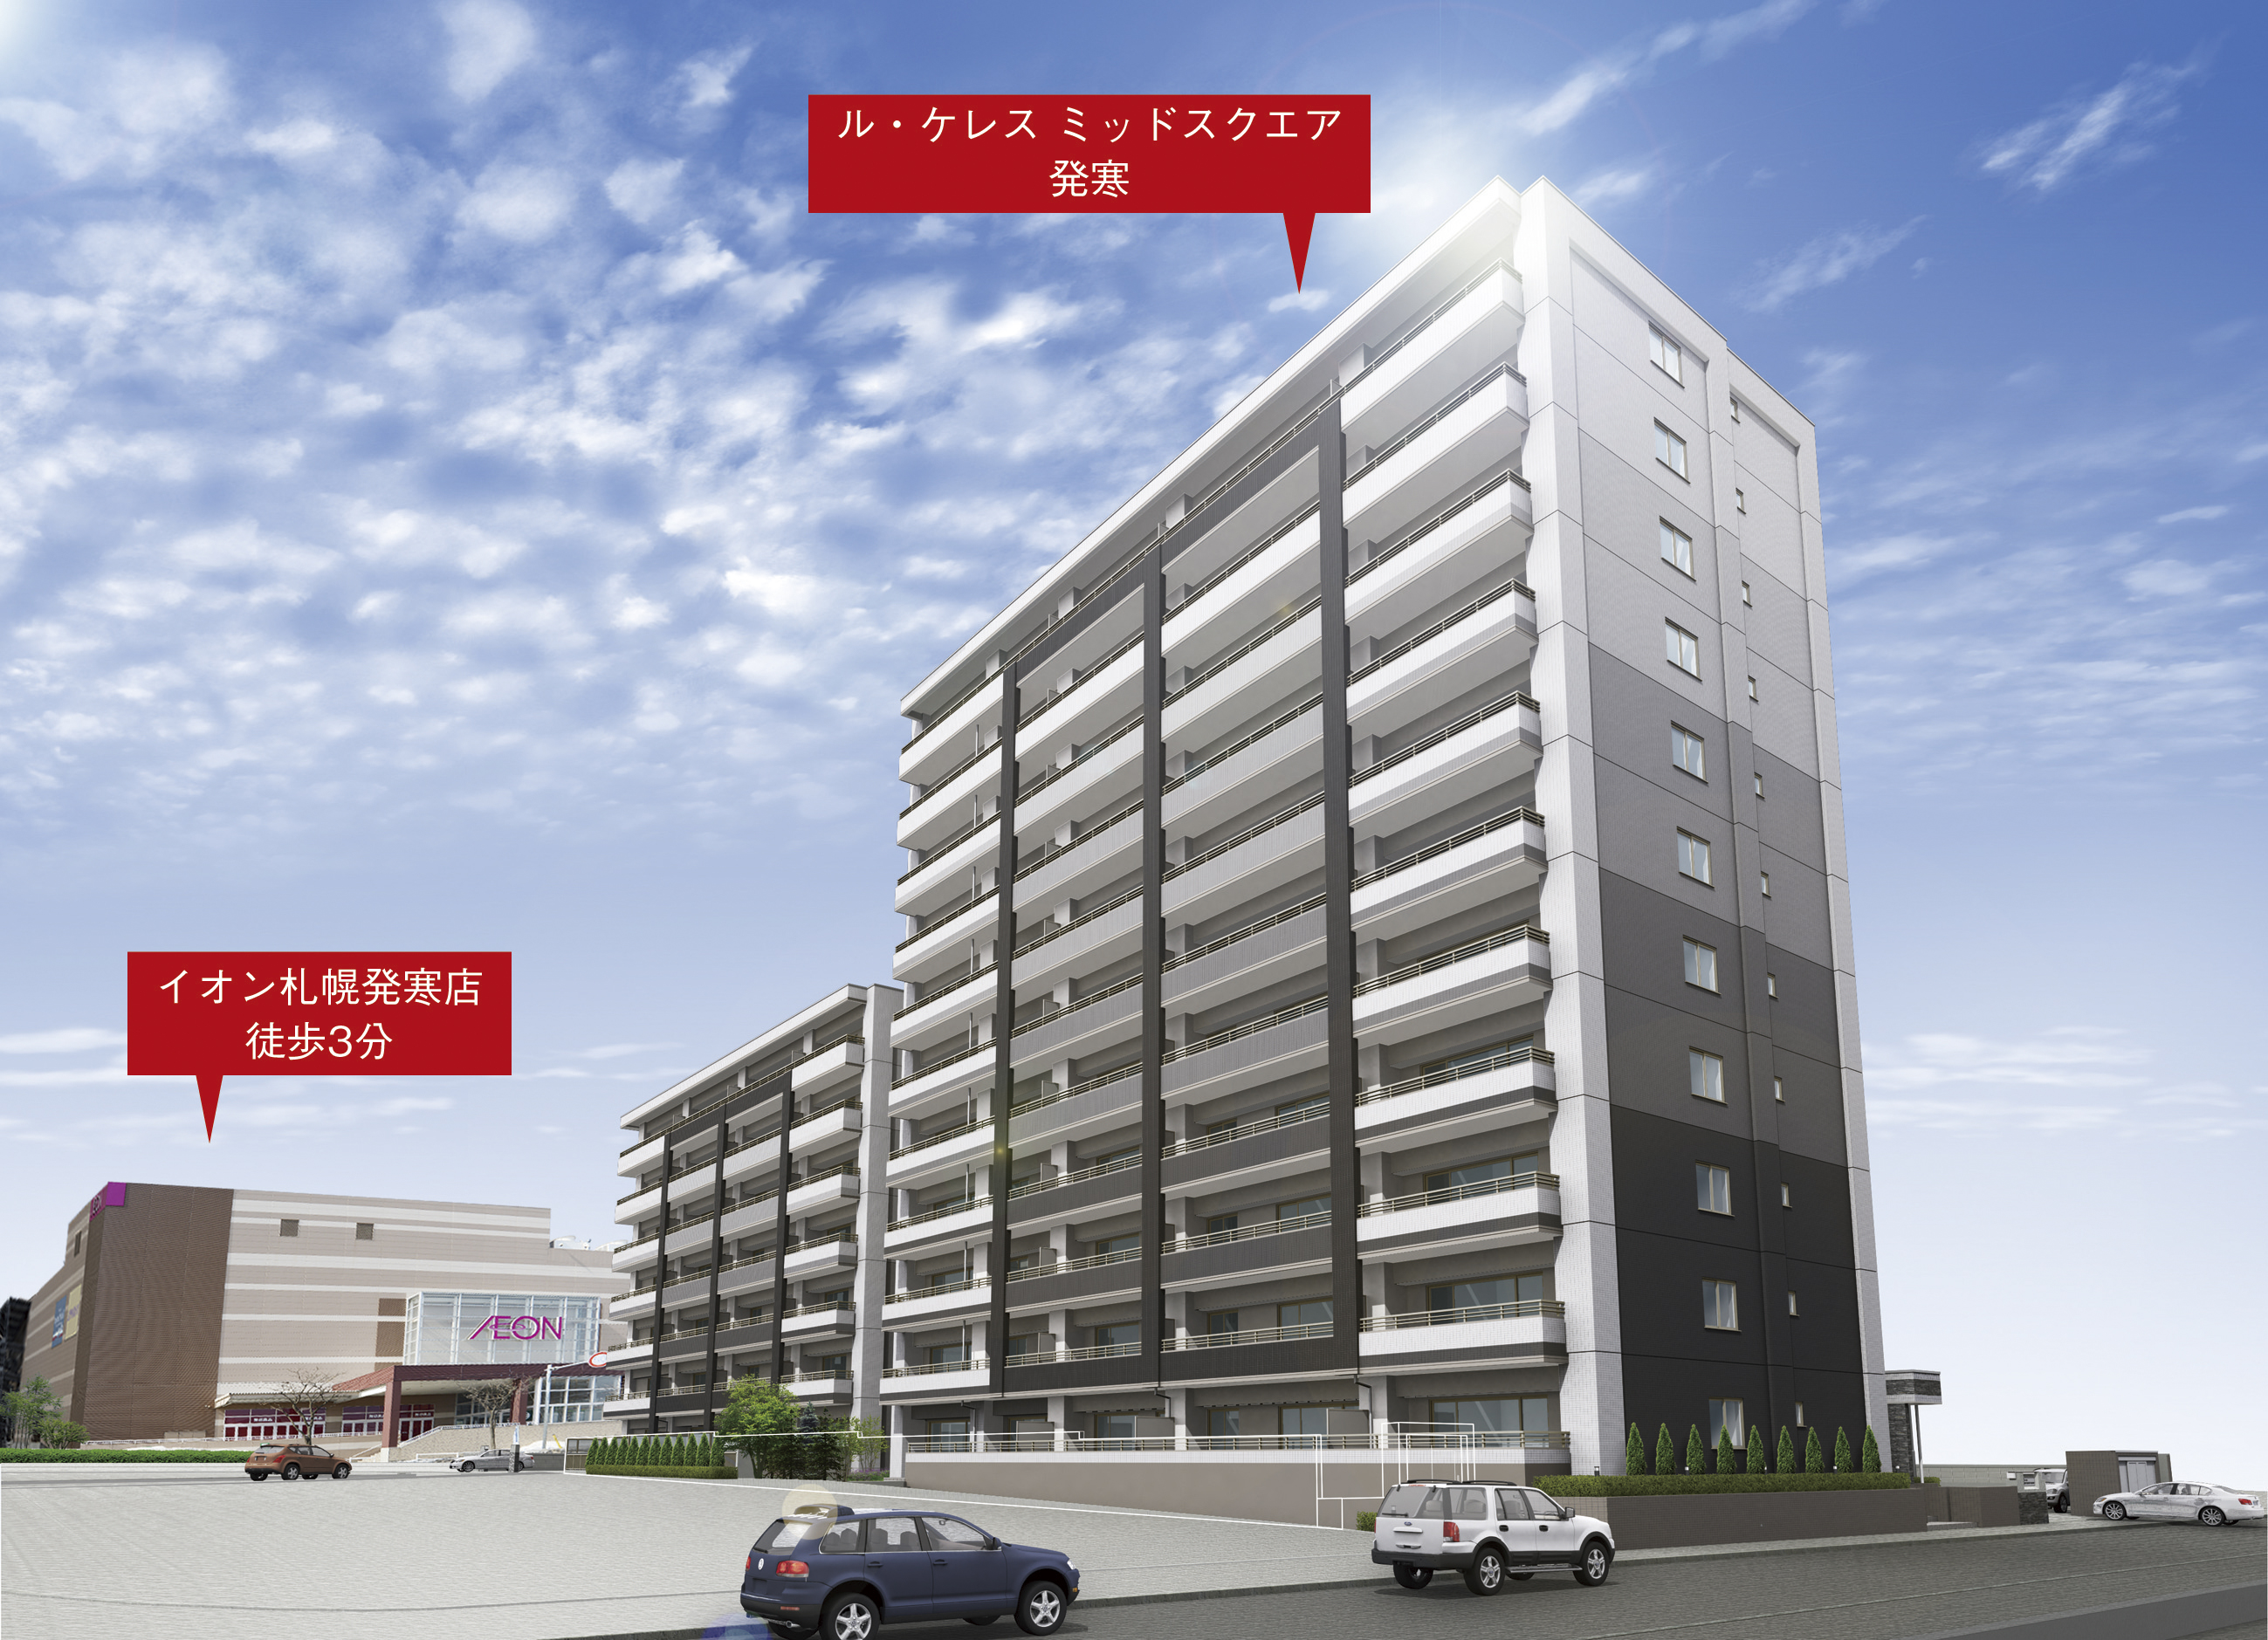 Building structure. Exterior view of shopping was right in front of the fun ion. The entire load heating parking 100%, Secom 24-hour security, such as also in town. Because 30-year repair reserve certain, Repayment plan is set up easy to merit also attention